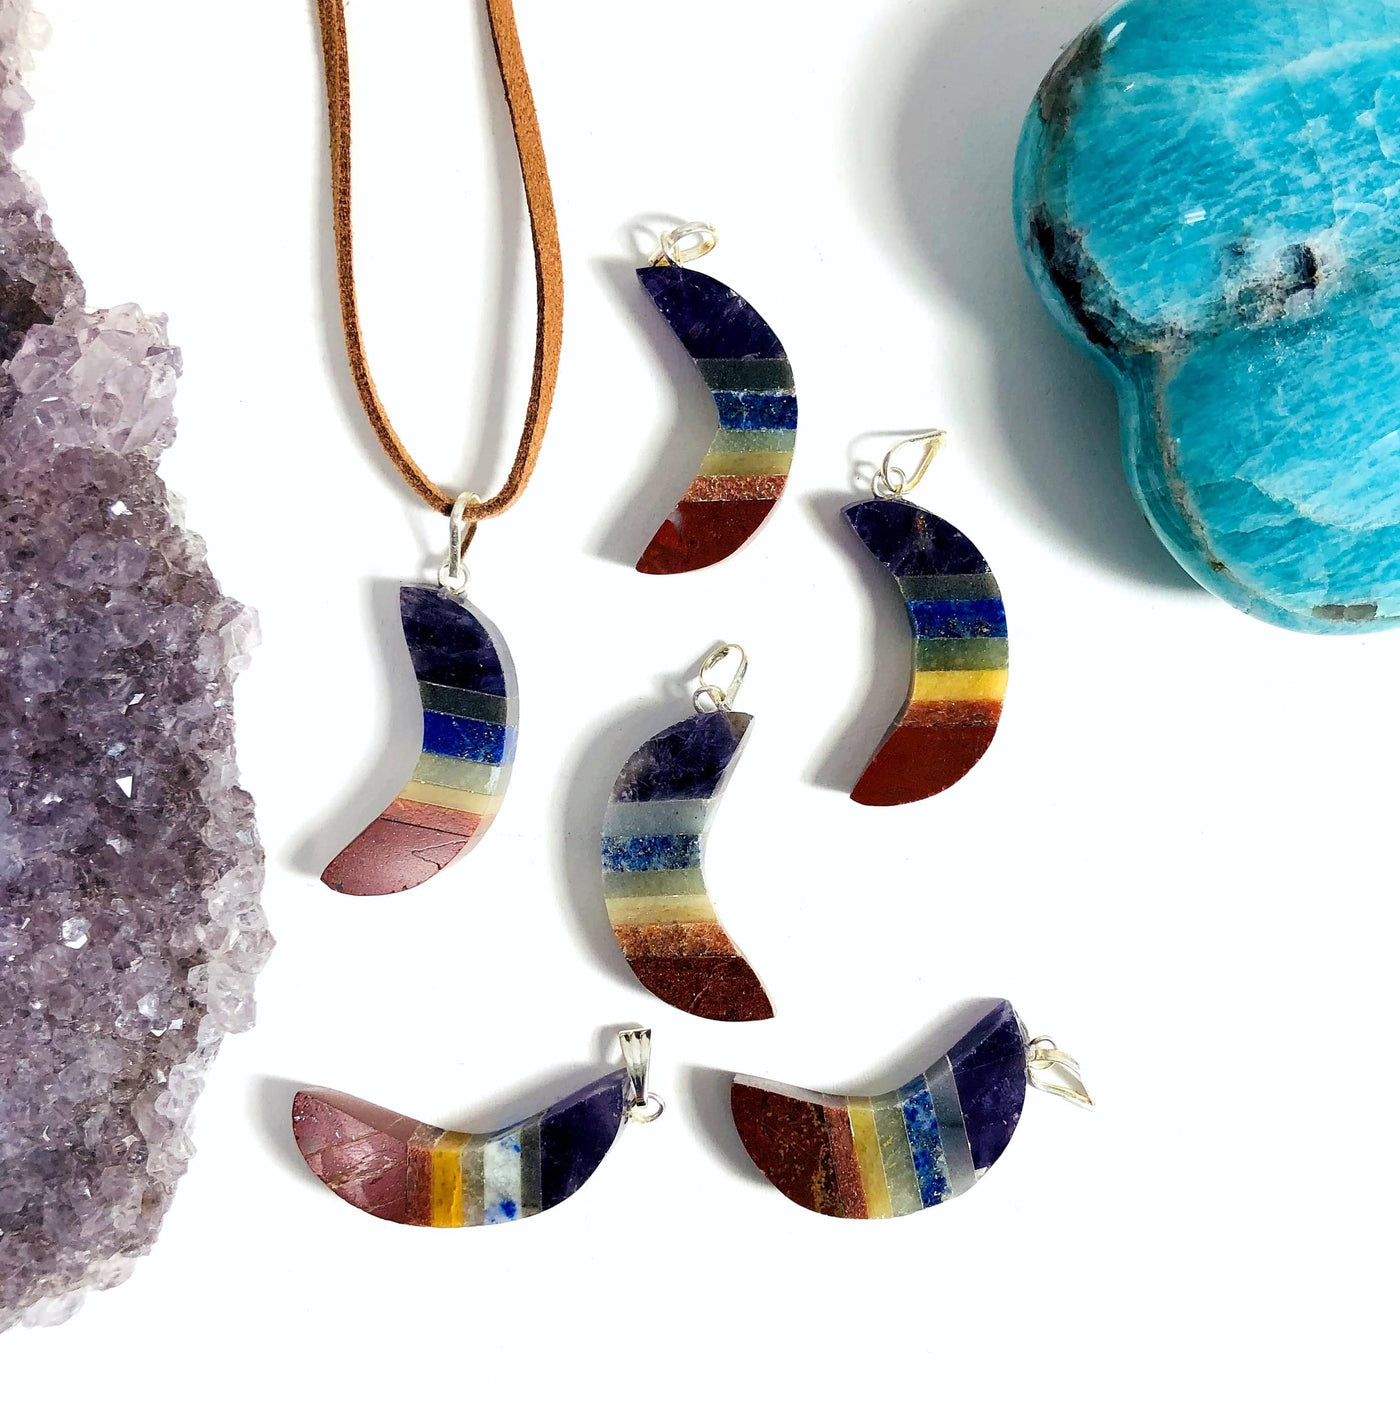 multiple moon pendants displayed to show the slight differences in the stones